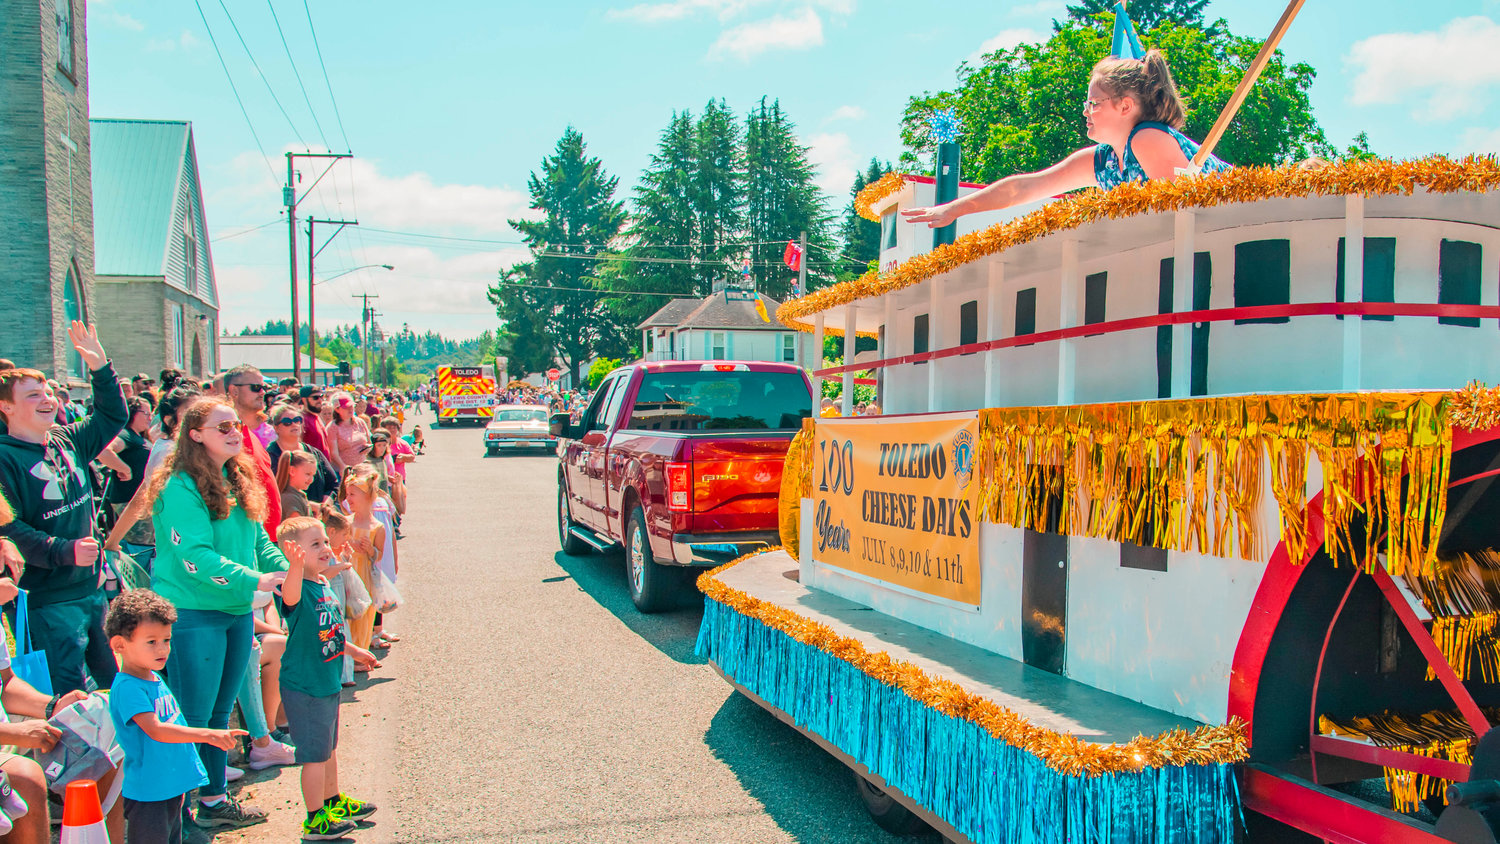 Candy is thrown to crowds from a Toledo Cheese Days float during the parade in 2021.